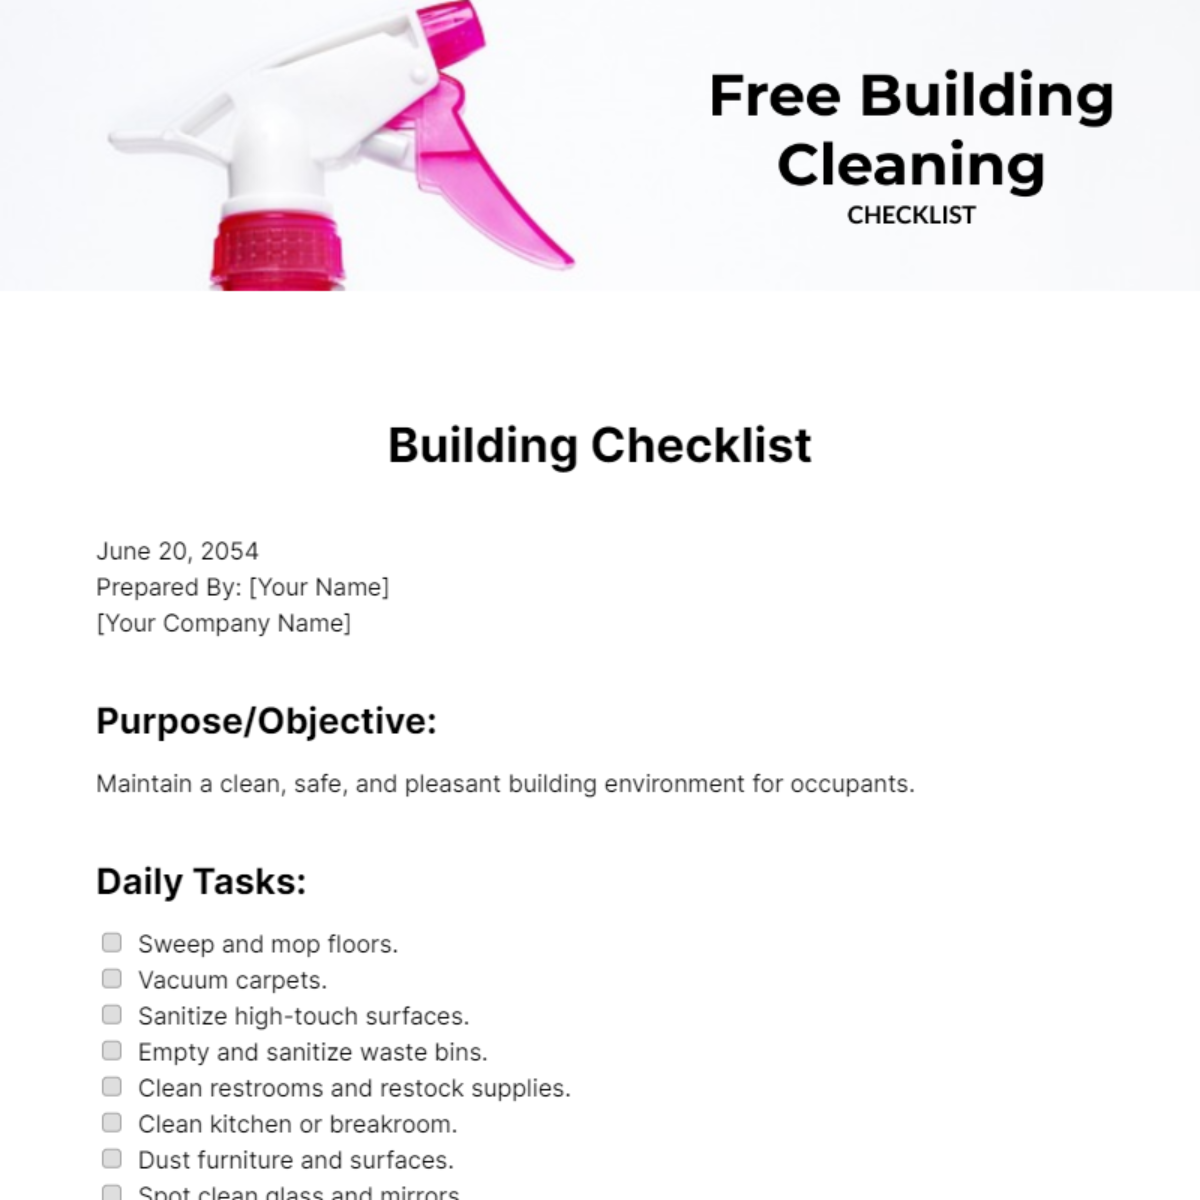 Free Building Cleaning Checklist Template